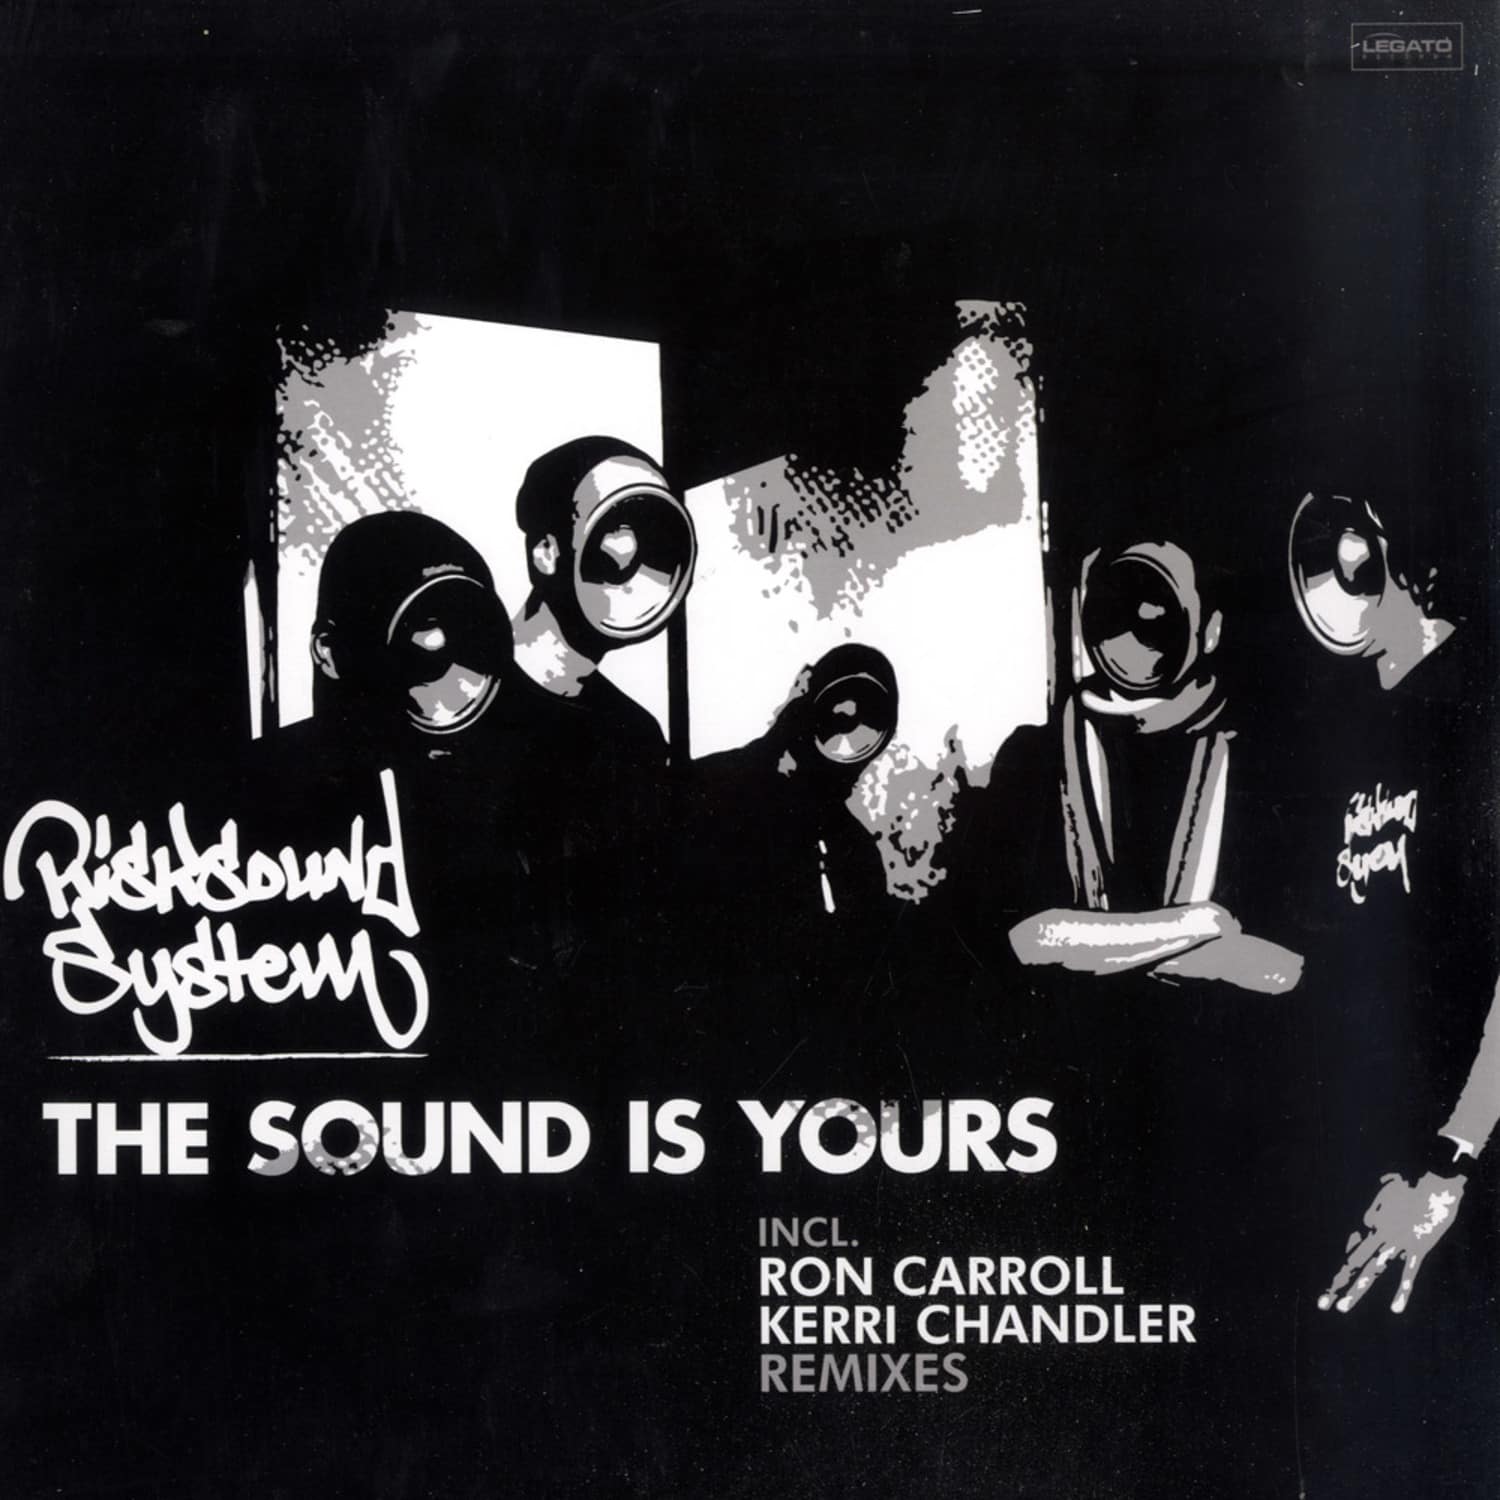 Risksoundsystem - THE SOUND IS YOURS